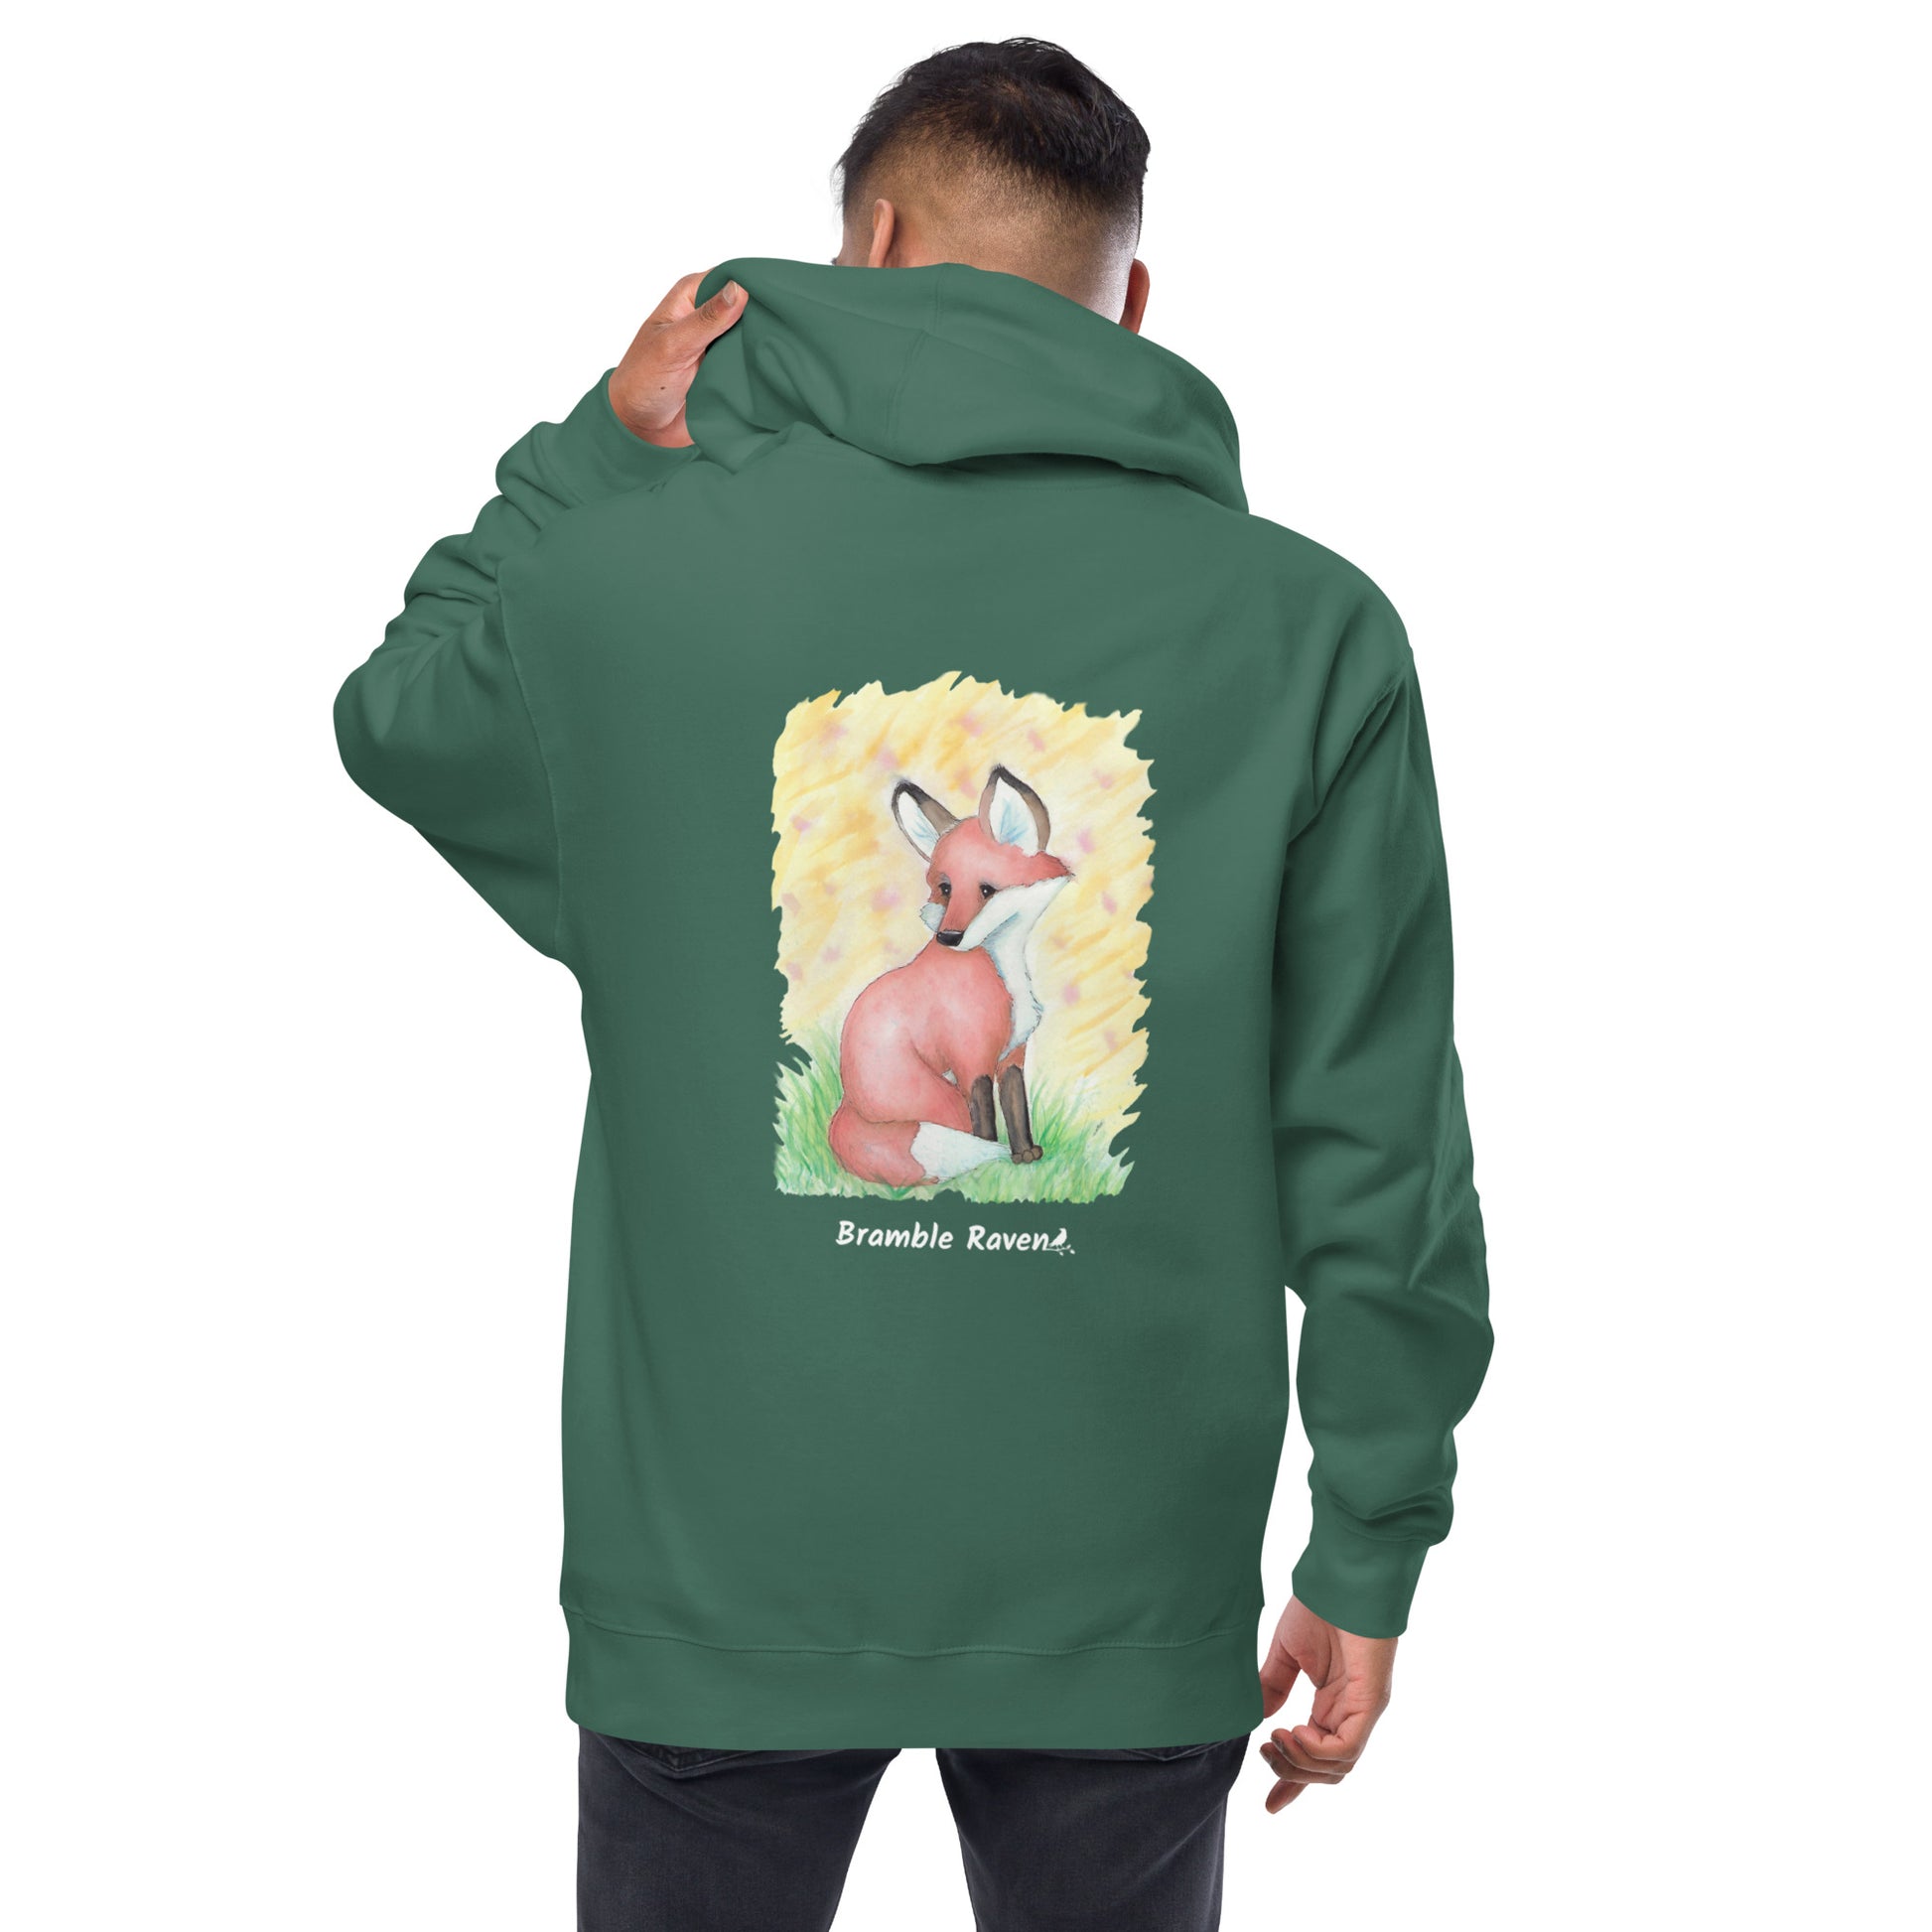 Unisex alpine green colored zip-up fleece-lined hoodie. Features original watercolor painting of a fox sitting in the grass on the back of the hoodie. Shown on male model.